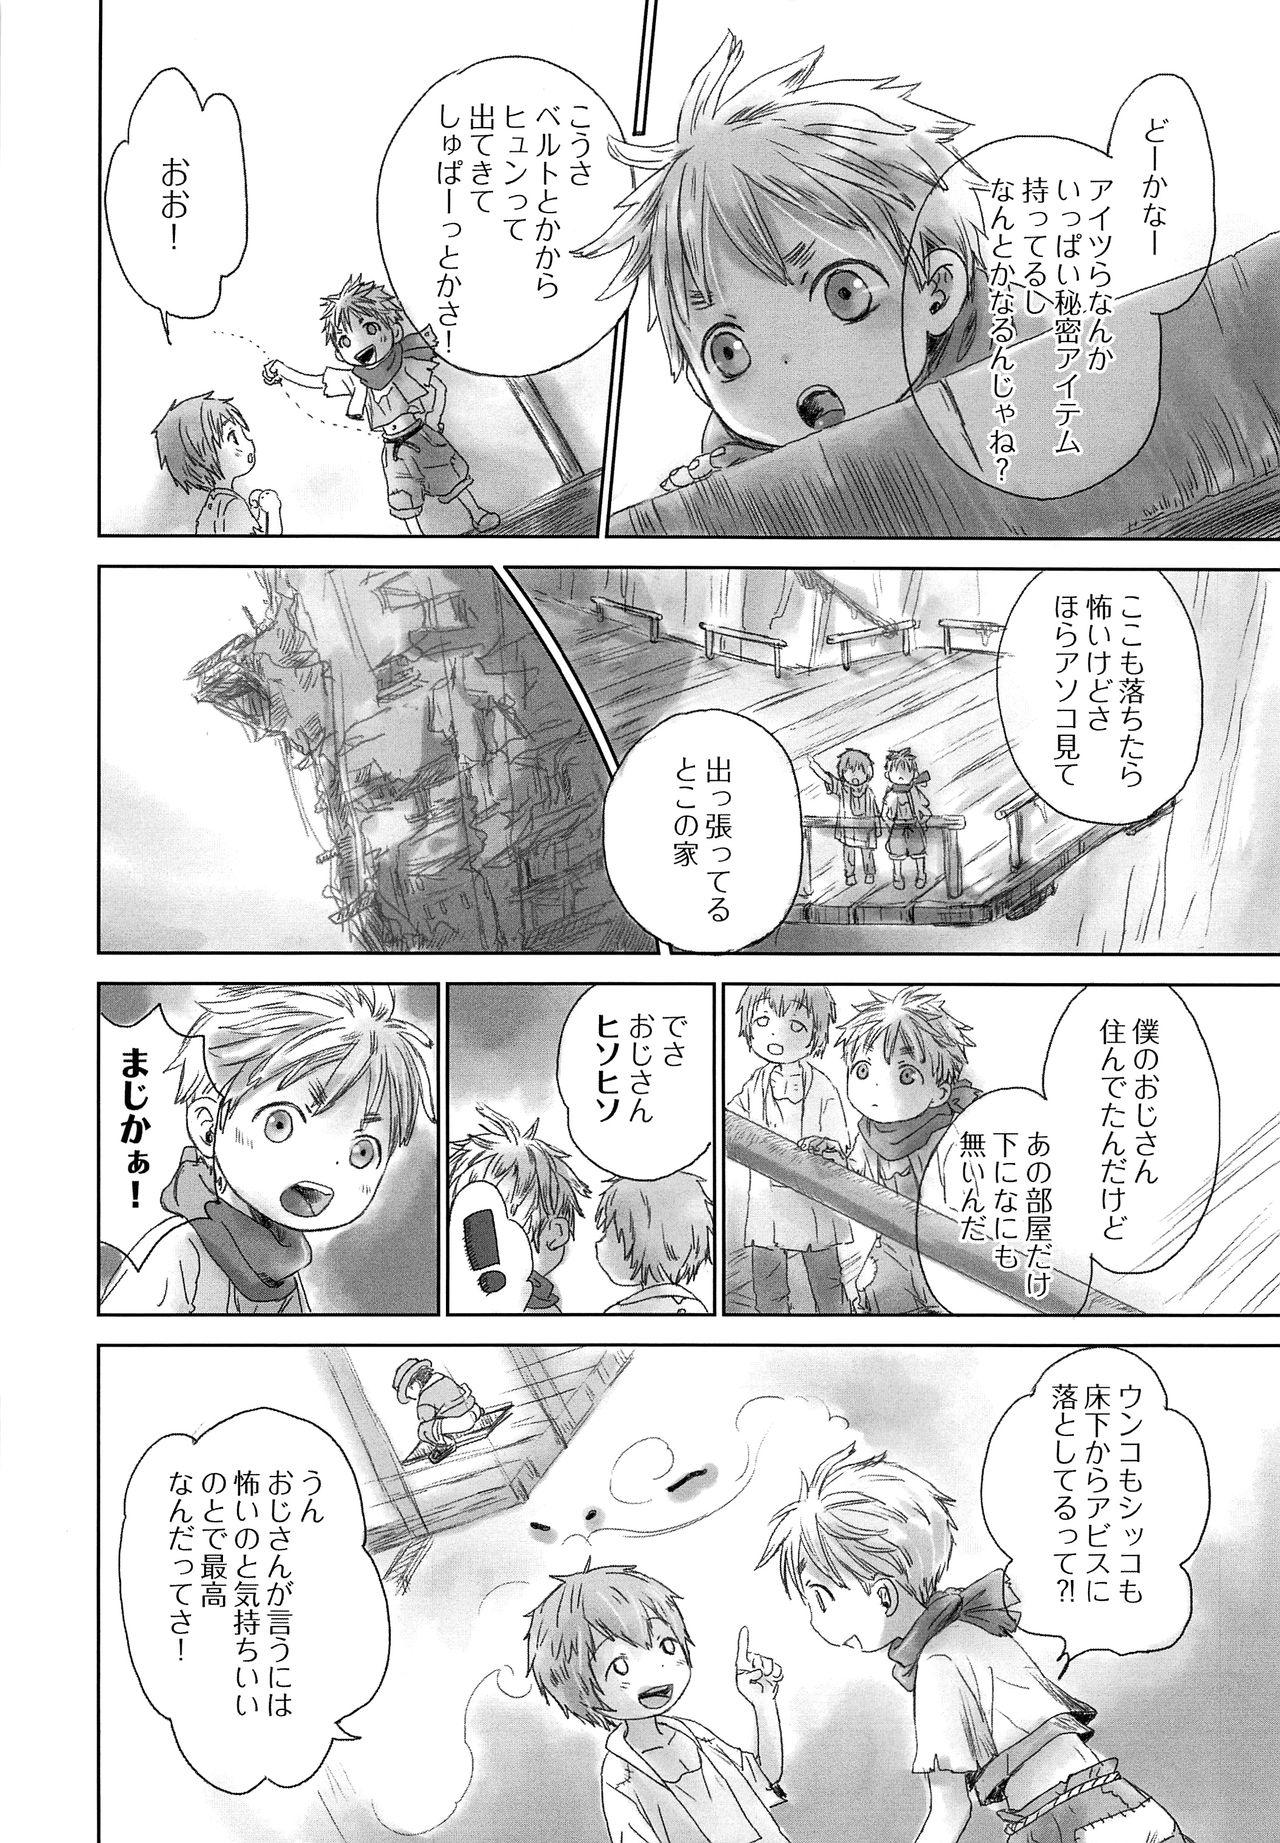 Salope Ganpekigai no Nut - Made in abyss Natural Tits - Page 5